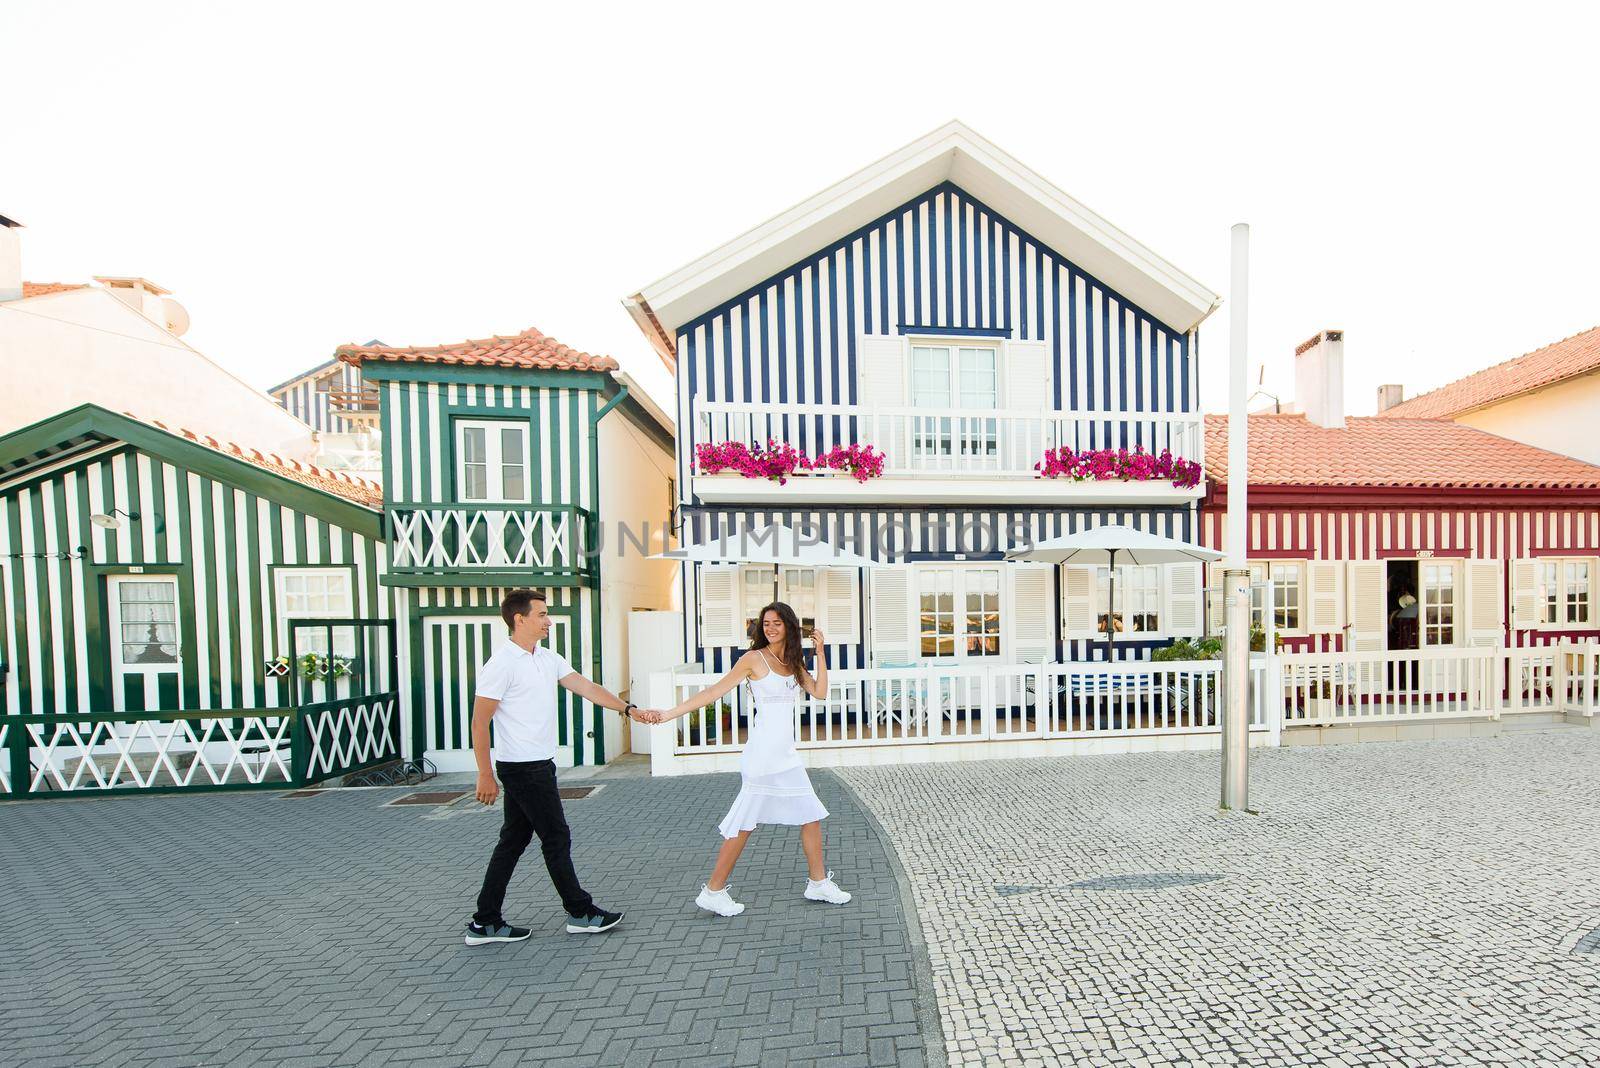 Young couple in white clothes walks around street in Aveiro, Portugal near colourful and peaceful houses. Lifestyle. Having fun, laughs, smiles. by Rabizo